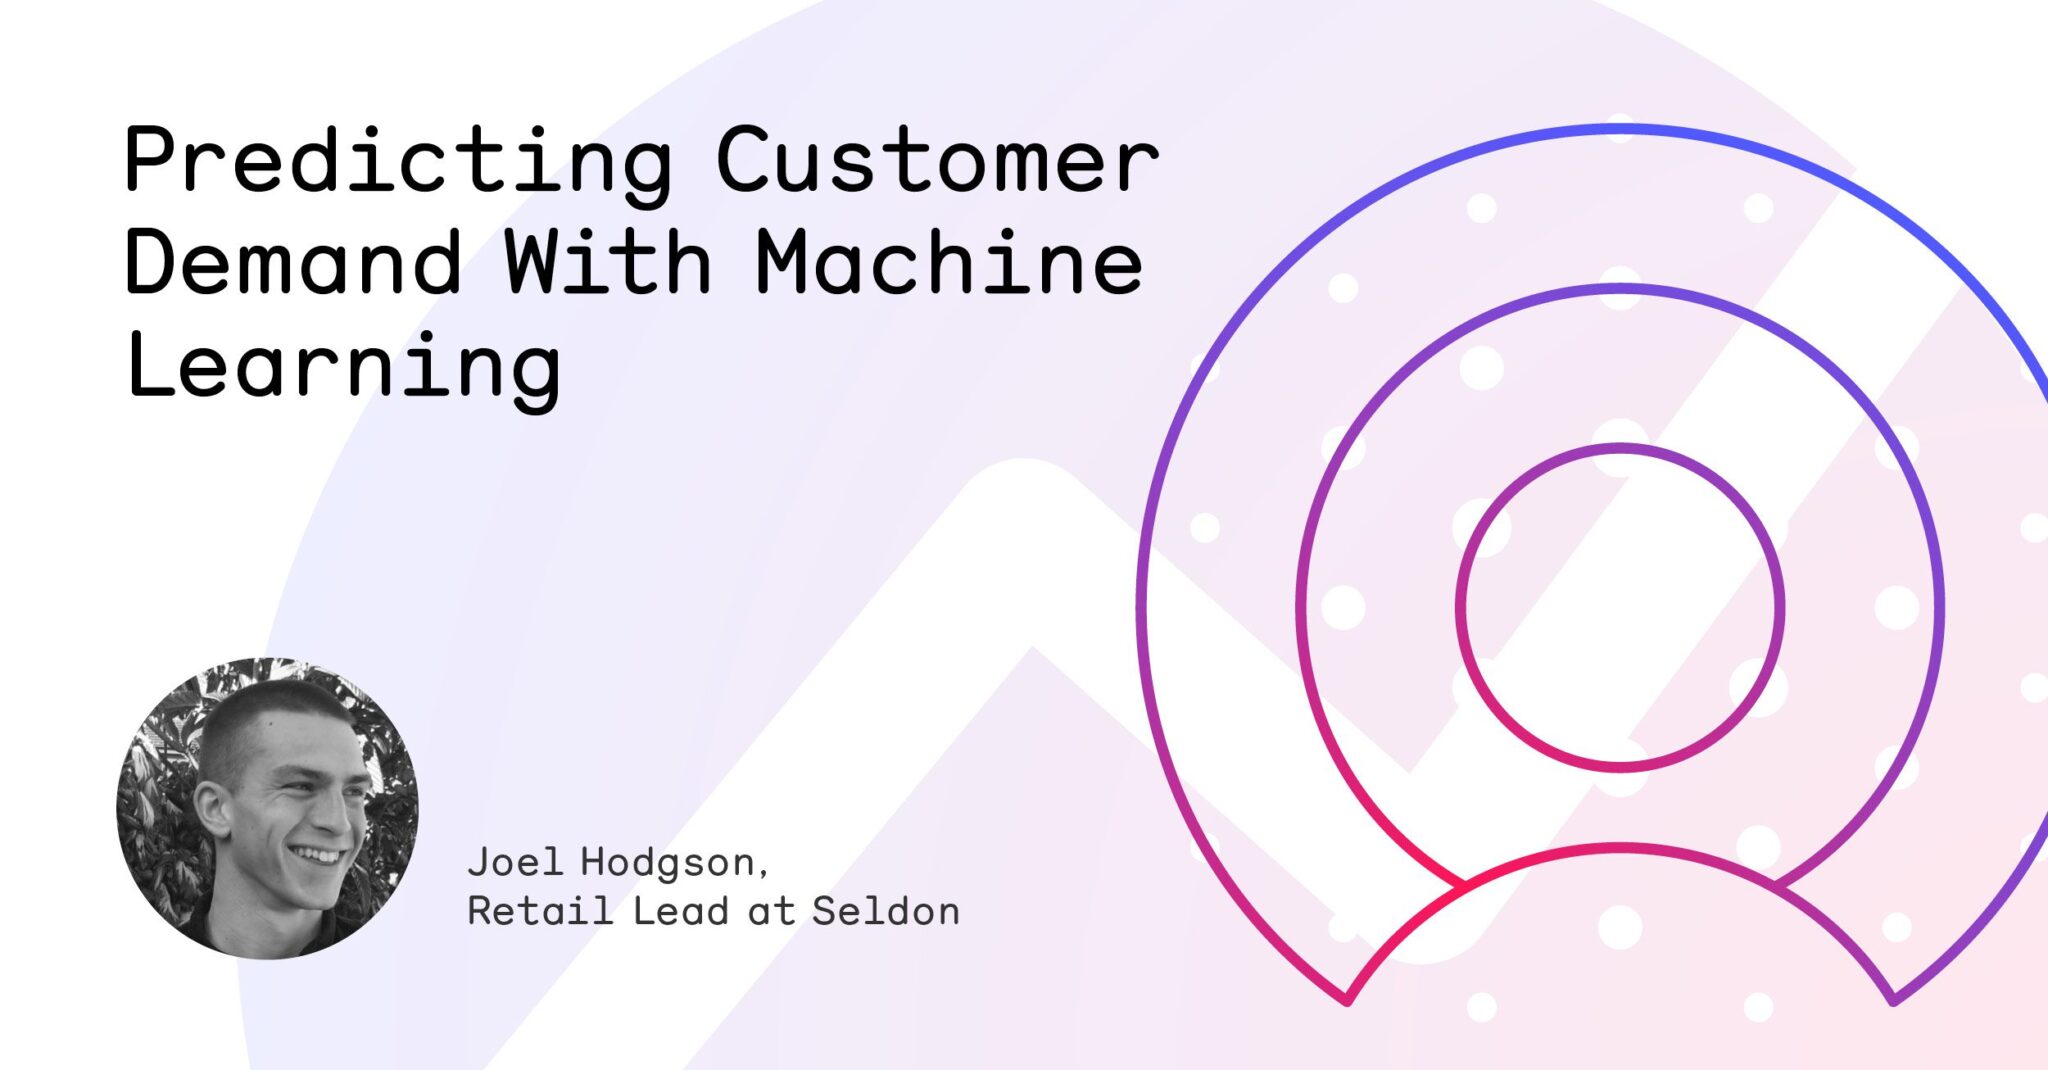 Predicting Customer Demand With Machine Learning